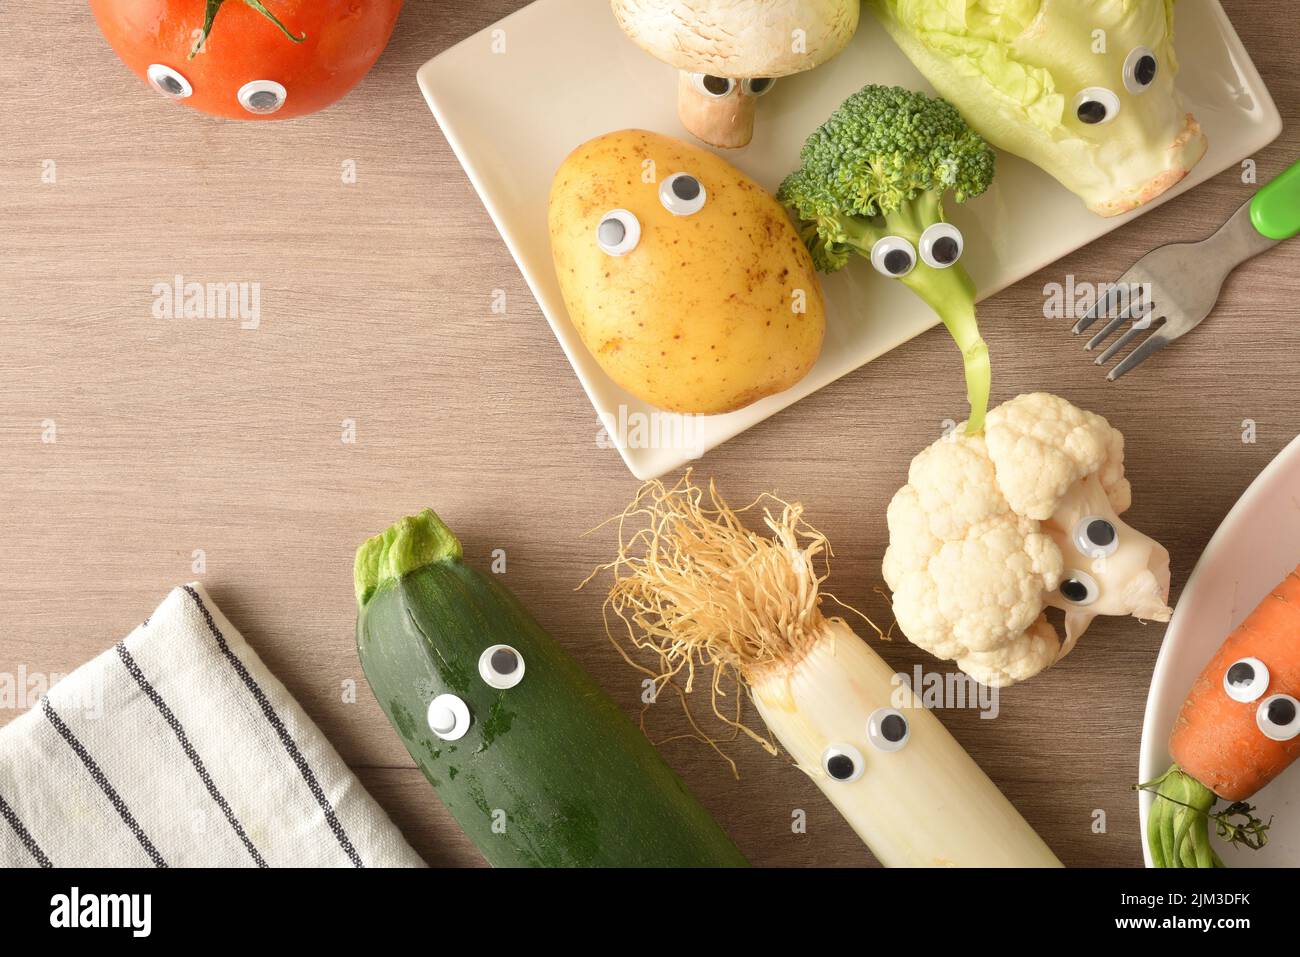 Child nutrition concept with detail of raw vegetables with eyes on wooden table. Top view. Stock Photo